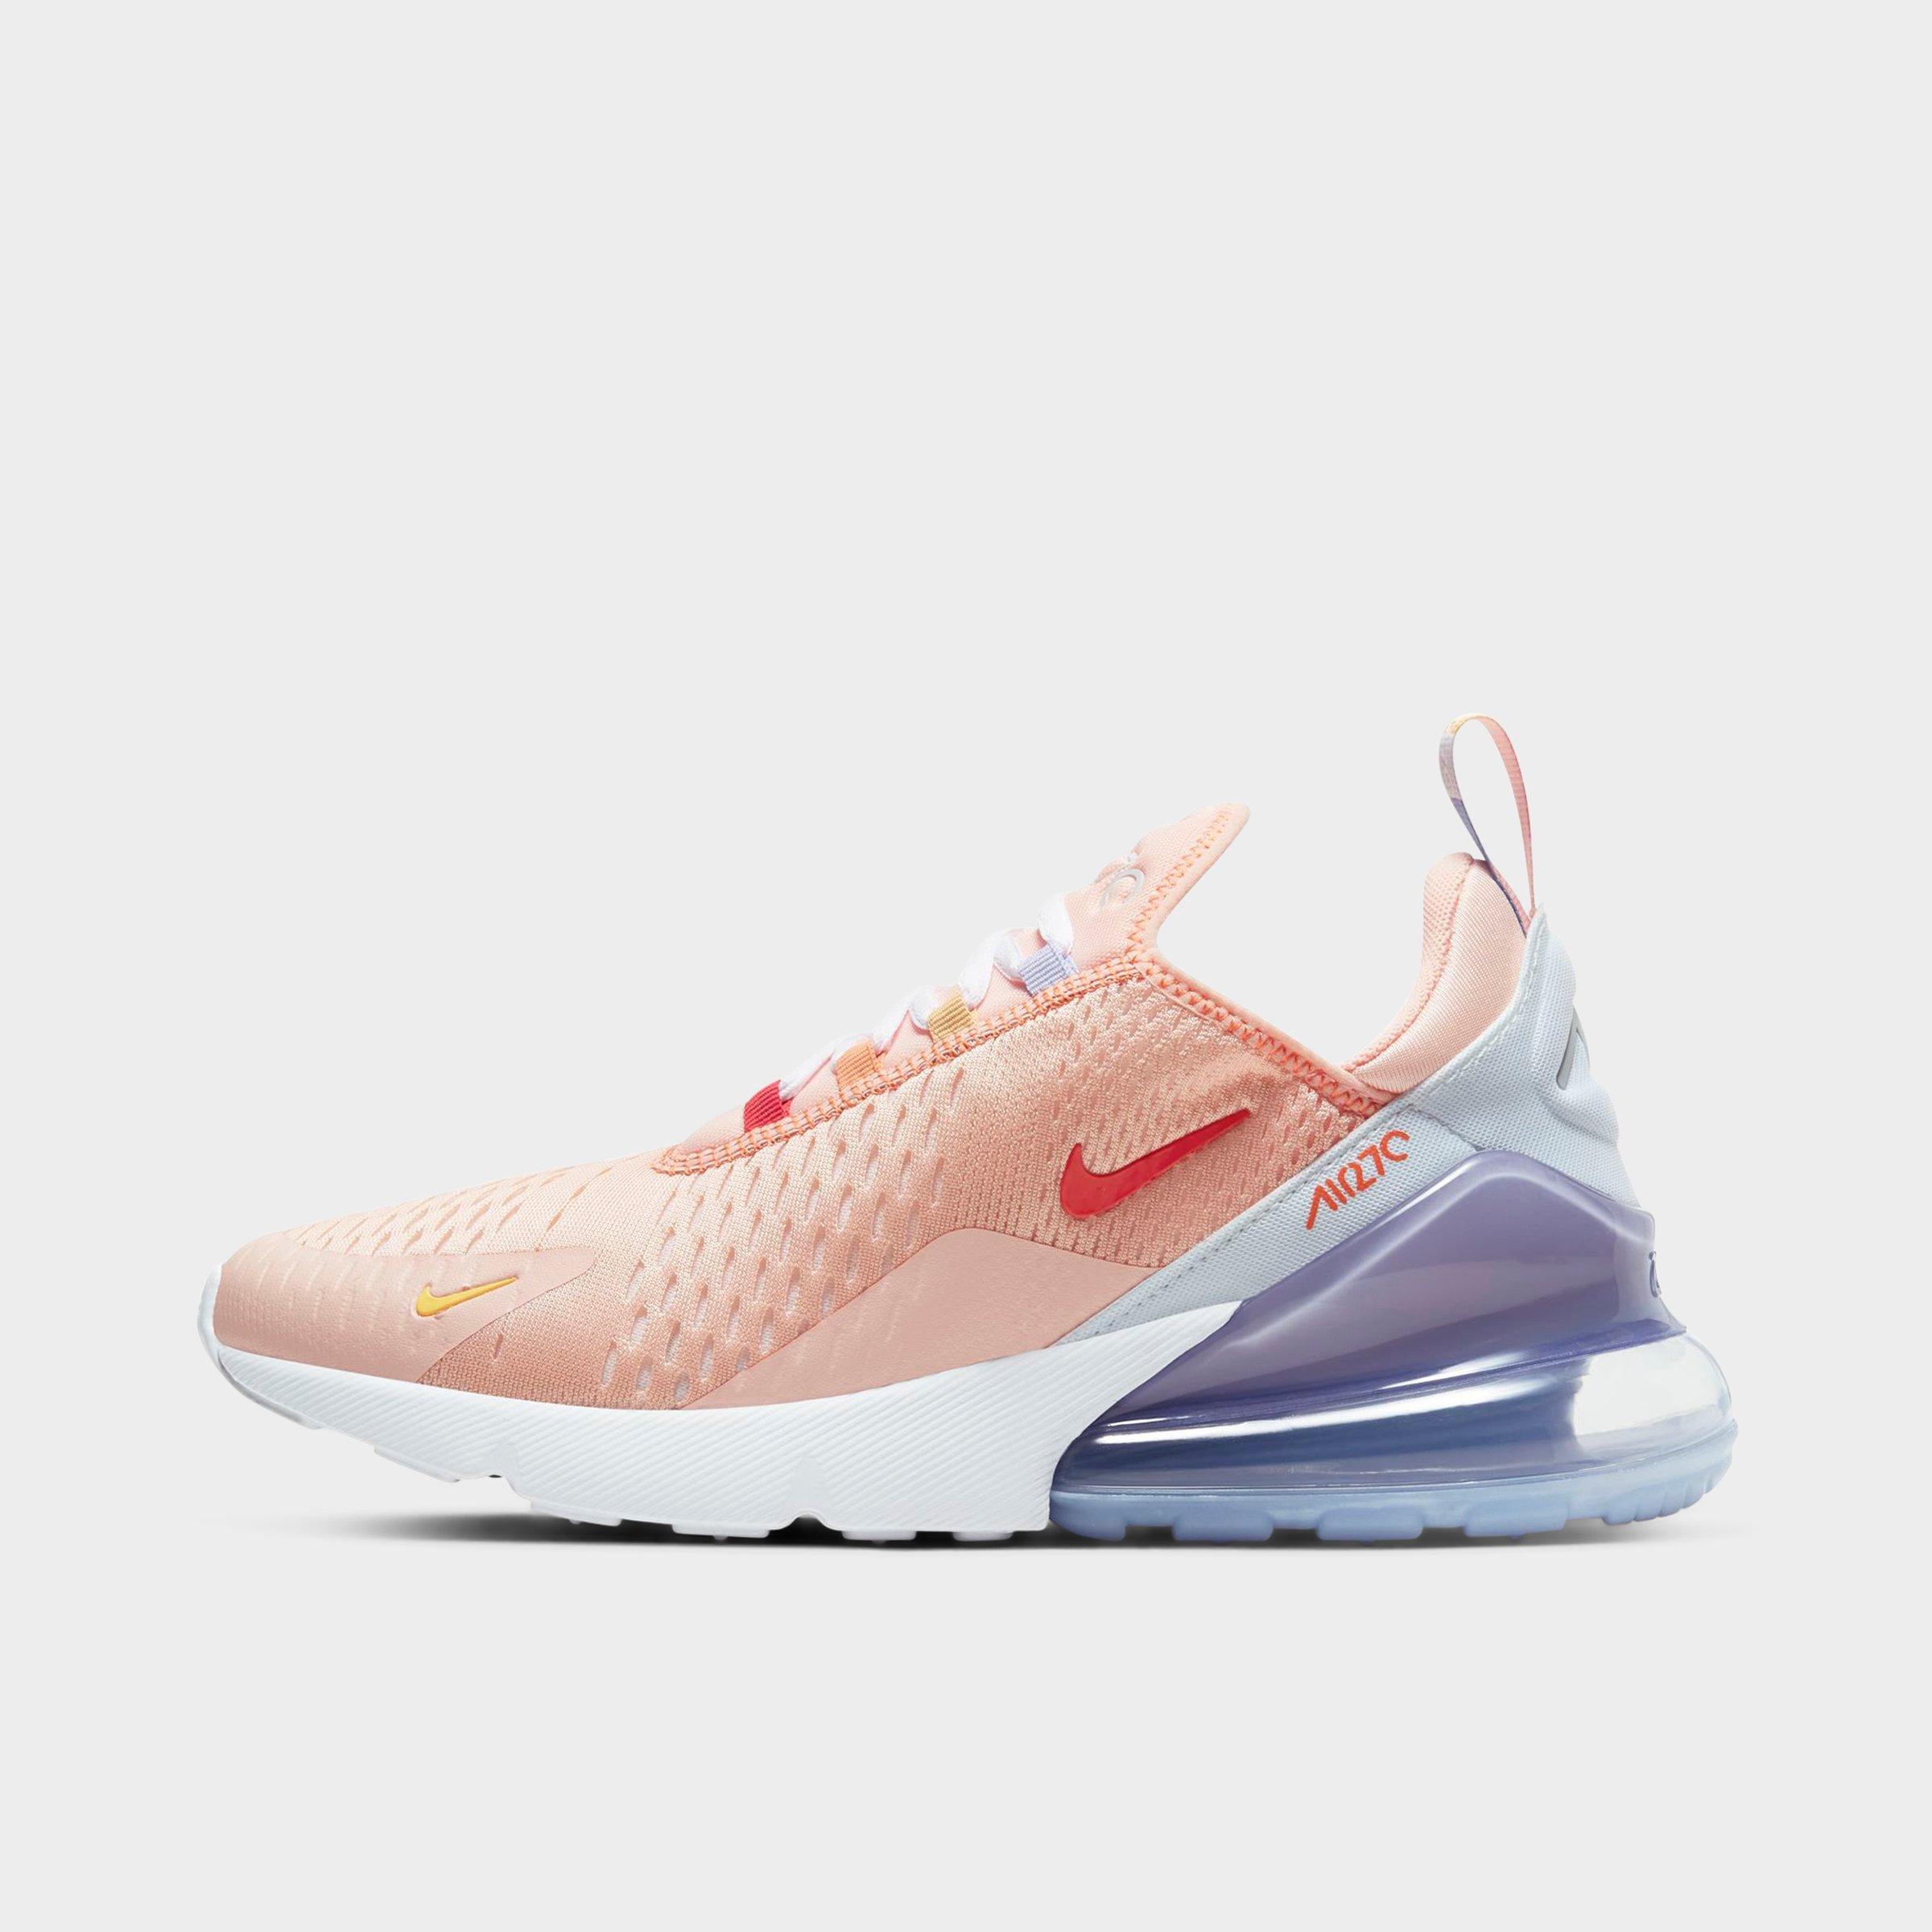 can you wash air max 270 in the washer